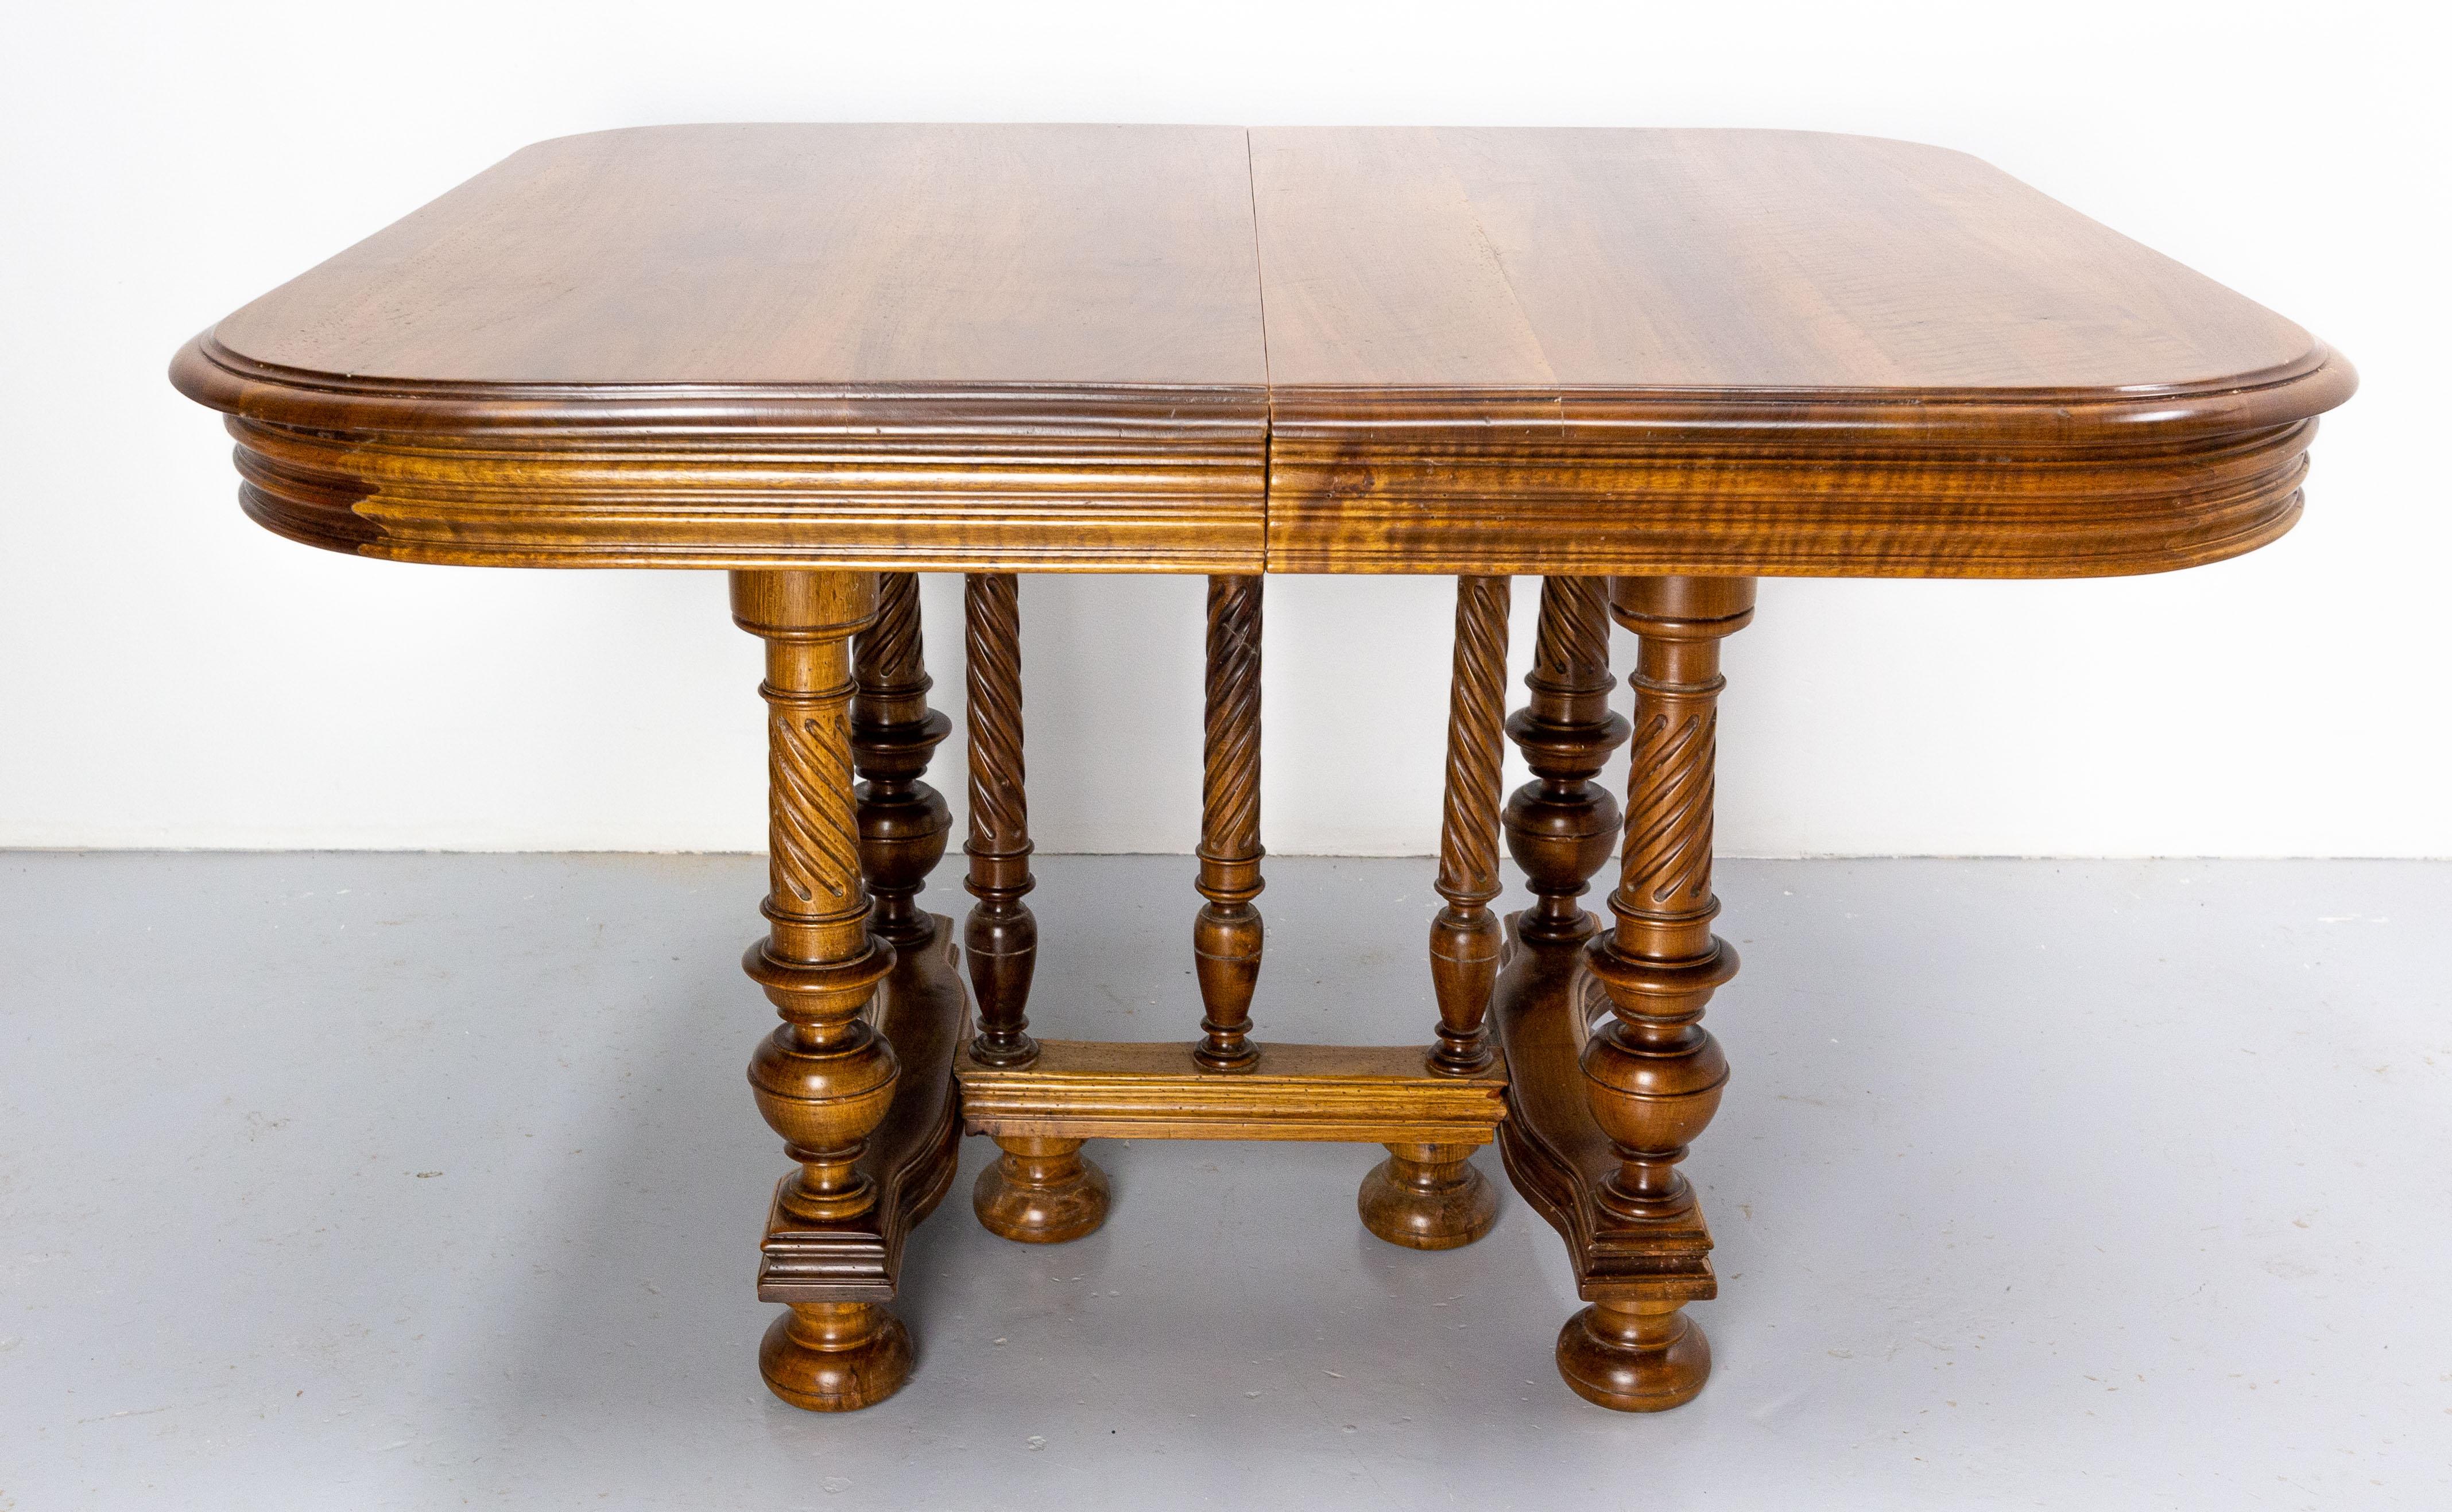 This walnut dining table in the Louis XIII style was made in France.
Without the extensions this table is 44.49 in. (113 cm) long. 
The seven twisted legs are typical of the Louis XIII style.
The extensions of the table are the originals.
Good